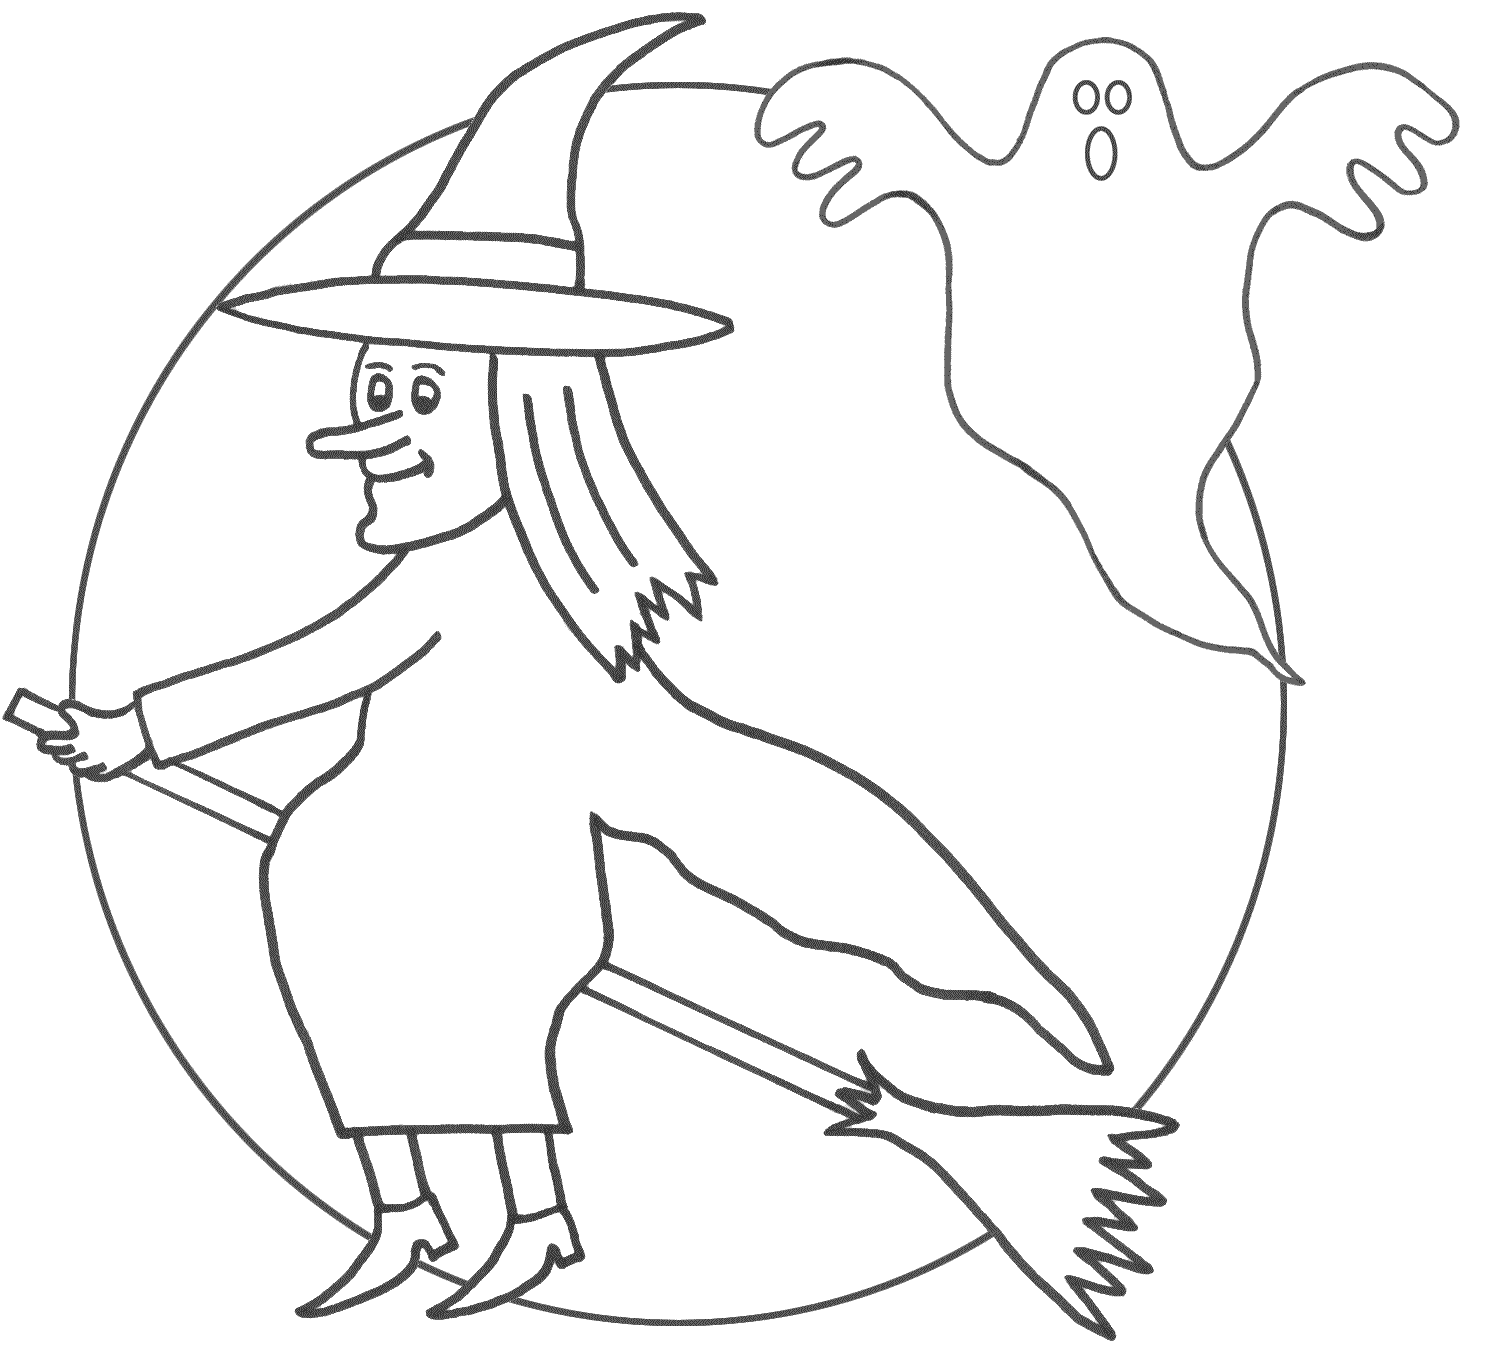 Hallween Witch 1 Coloring Kids - Coloring Kids